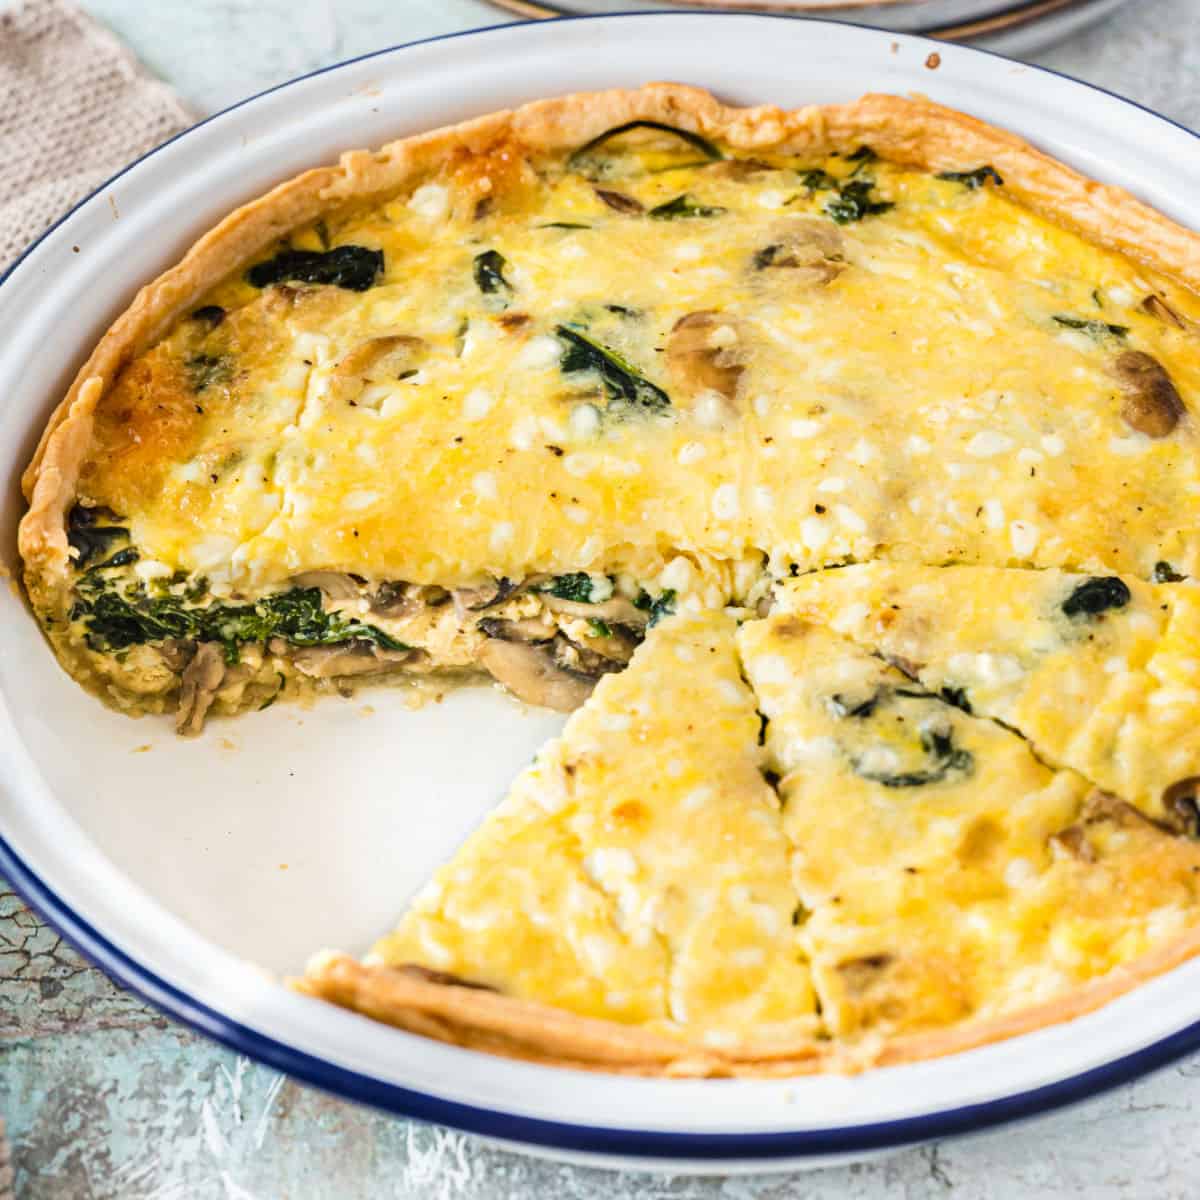 square image of a spinach and mushroom quiche with a slice taken out of the plate to show the filling